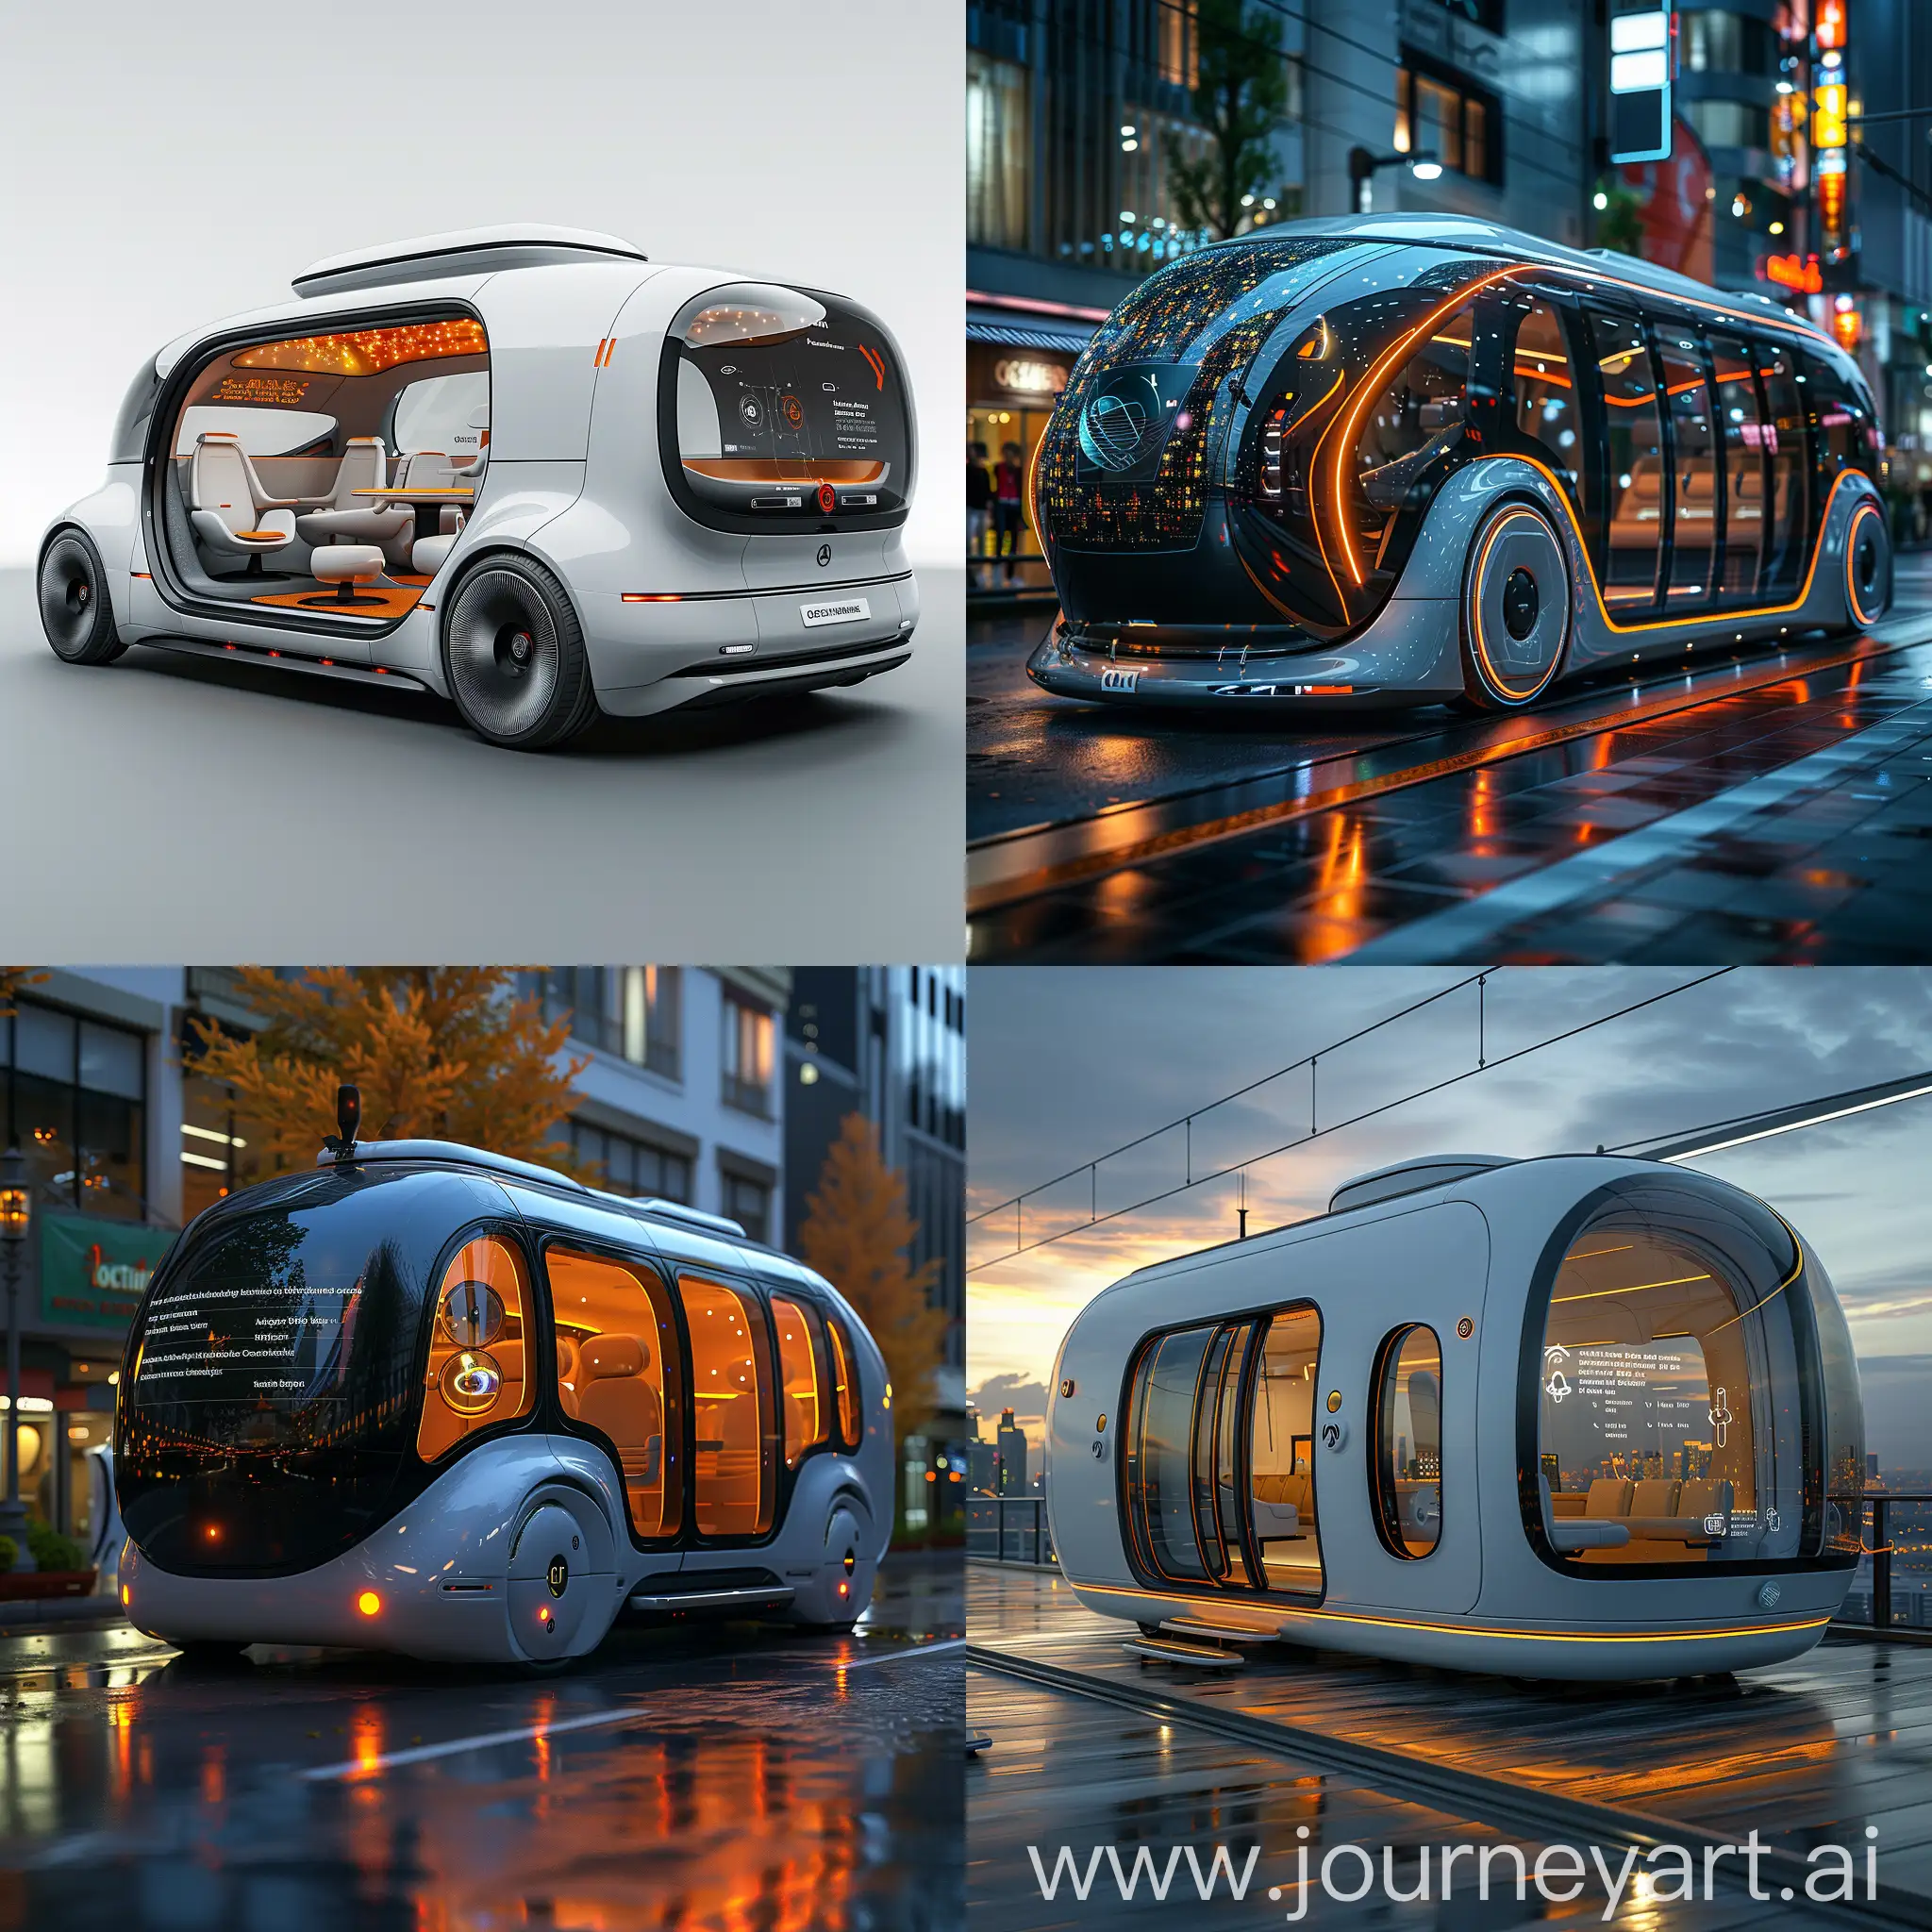 Futuristic microbus, Autonomous Driving, Holographic Displays, Biometric Identification, Augmented Reality Windshield, Self-Healing Material, Energy-Efficient Design, Health Monitoring System, Interactive Voice Assistant, Smart Climate Control, Wireless Charging Stations, Modular Interior, Wheelchair Accessibility, Convertible Cargo Space, Adjustable Suspension, Sliding Doors, Retractable Steps, 360-Degree Cameras, Customizable Lighting, Air Quality Sensors, Adaptive Seating, octane render --stylize 1000